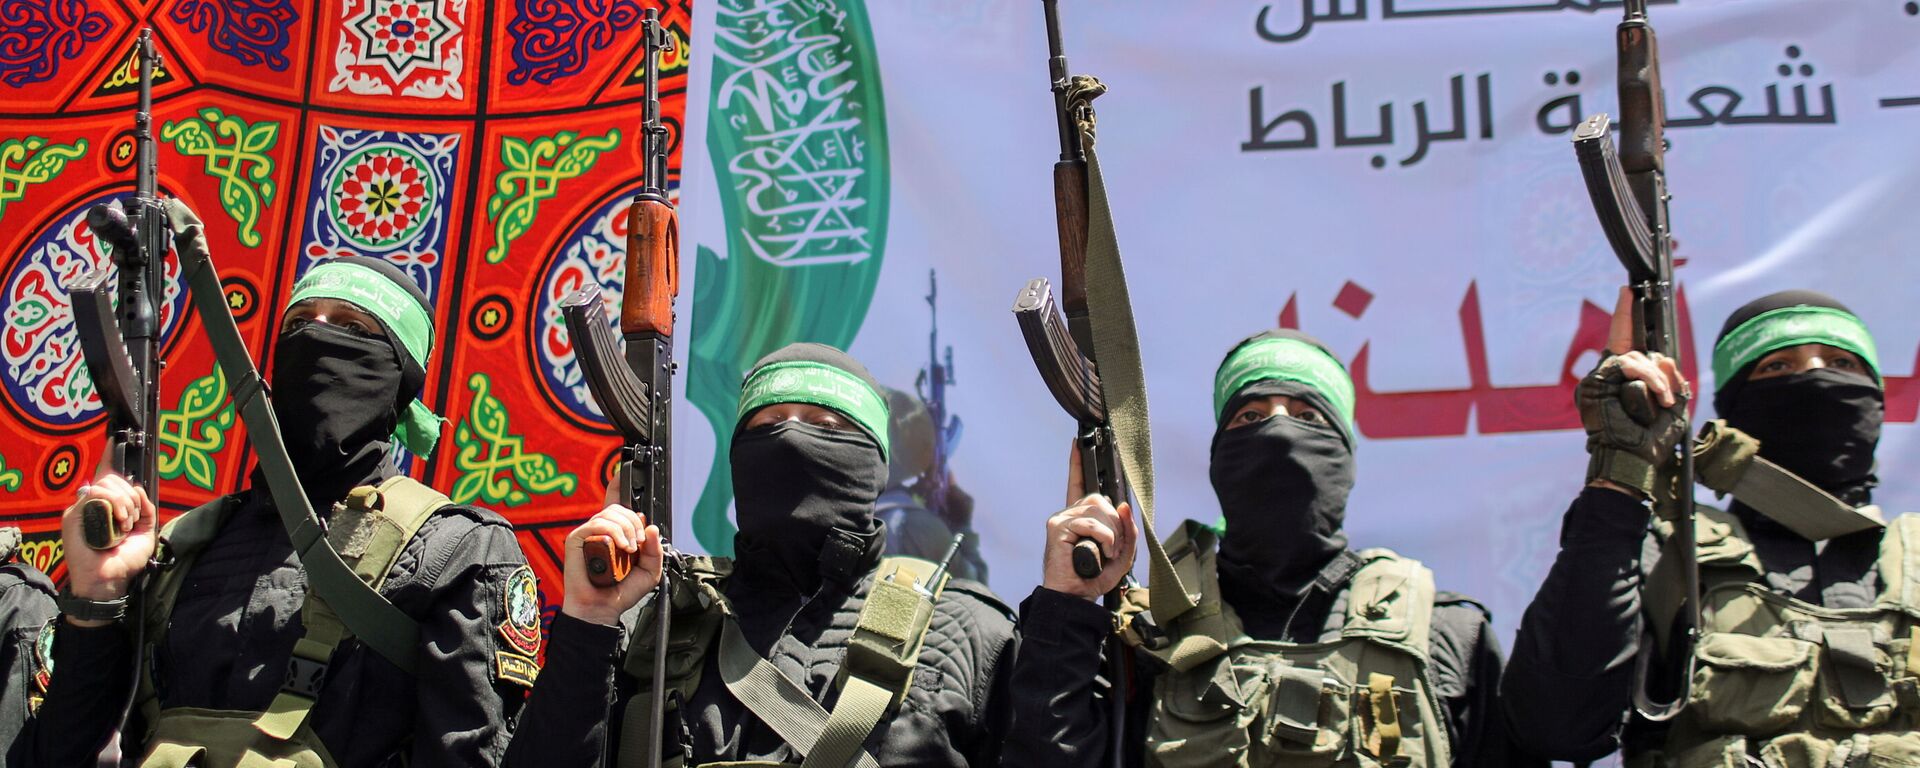 Palestinian Hamas militants take part in a protest over the possible eviction of several Palestinian families from homes on land claimed by Jewish settlers in the Jerusalem's Sheikh Jarrah neighbourhood, in the northern Gaza Strip May 7, 2021 - Sputnik International, 1920, 21.05.2021